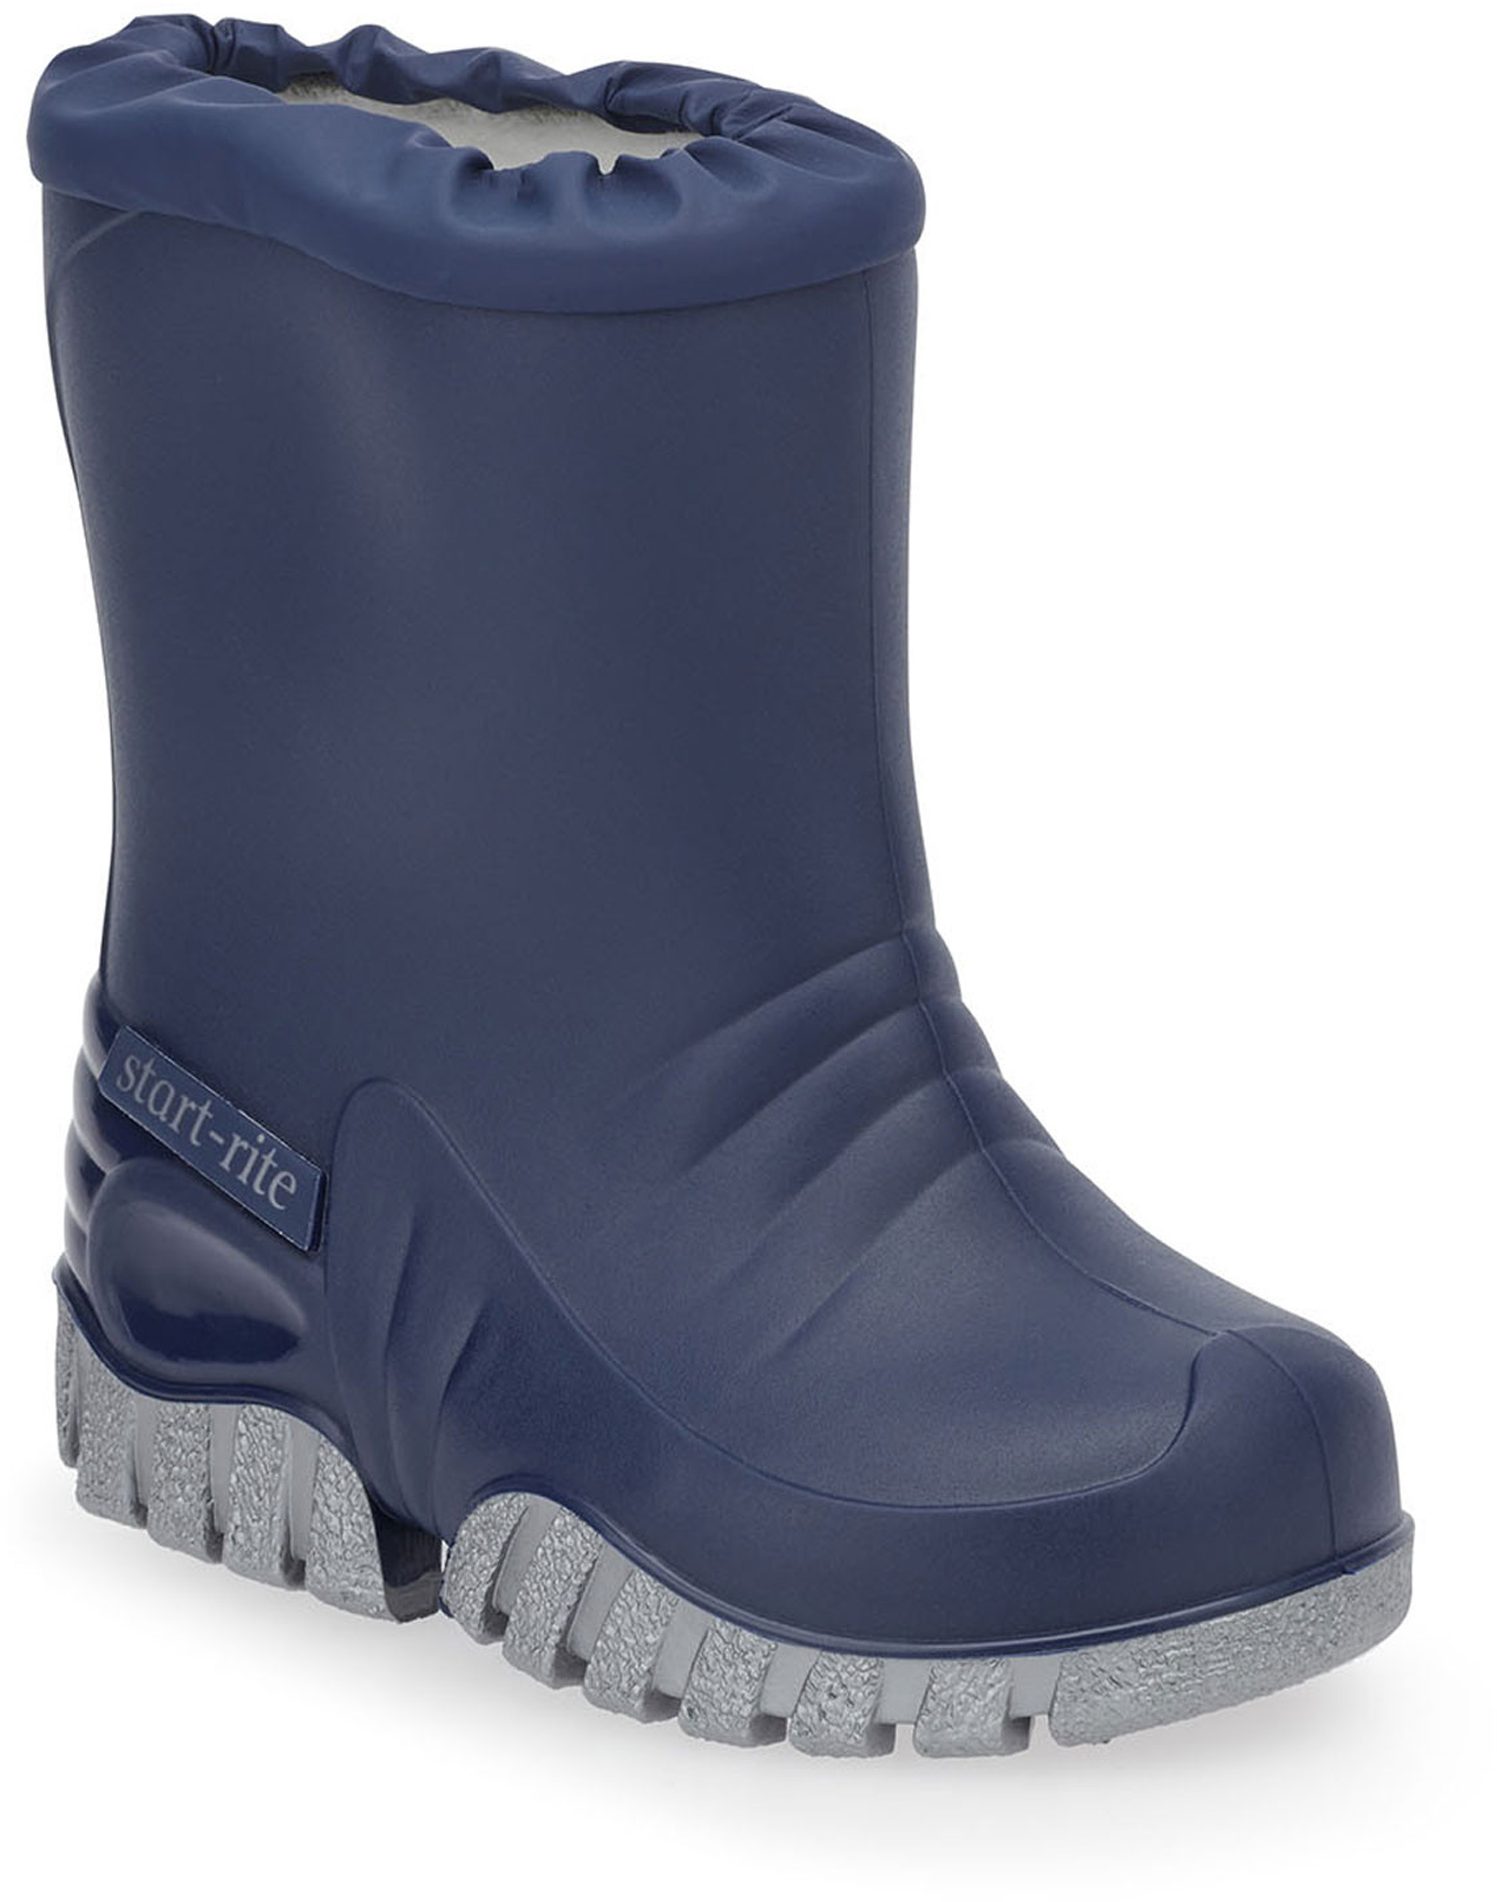 Start-Rite Baby Mud Buster Navy 9908_9 - Boys Wellies - Humphries Shoes